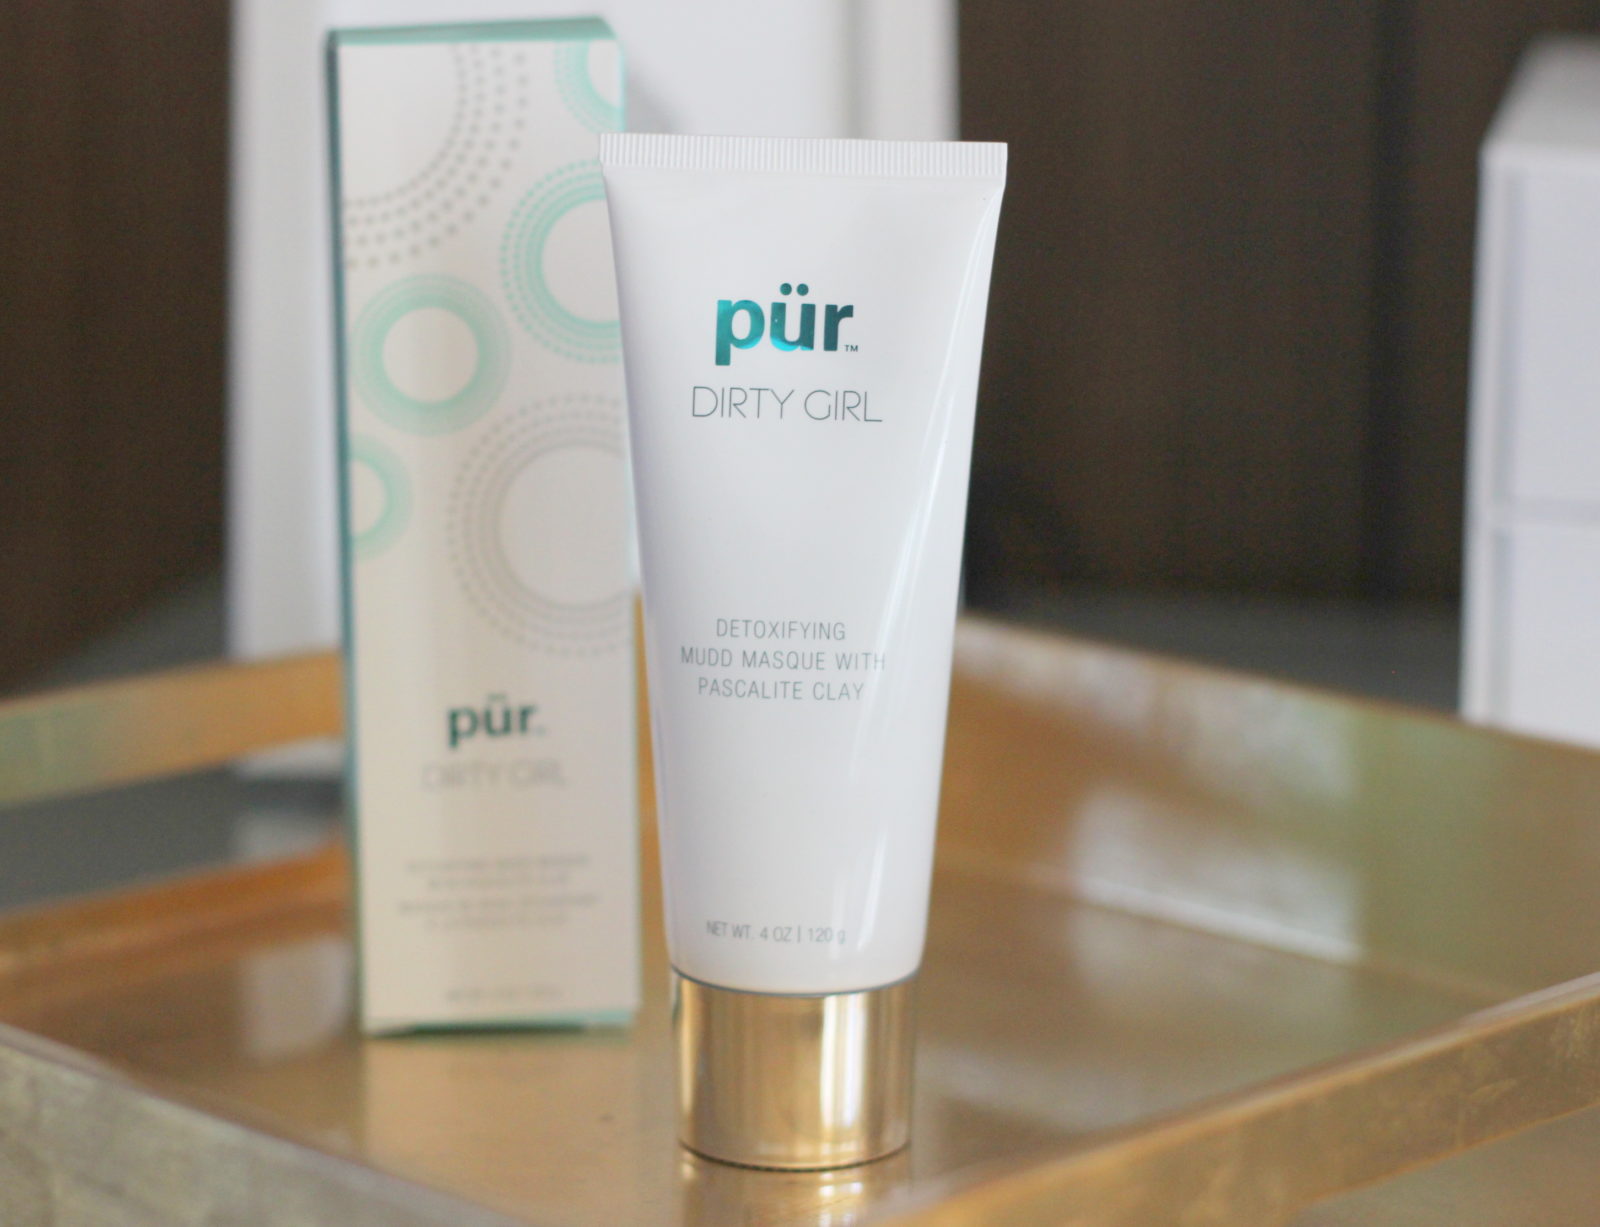 Pur Dirty Girl Mask Review